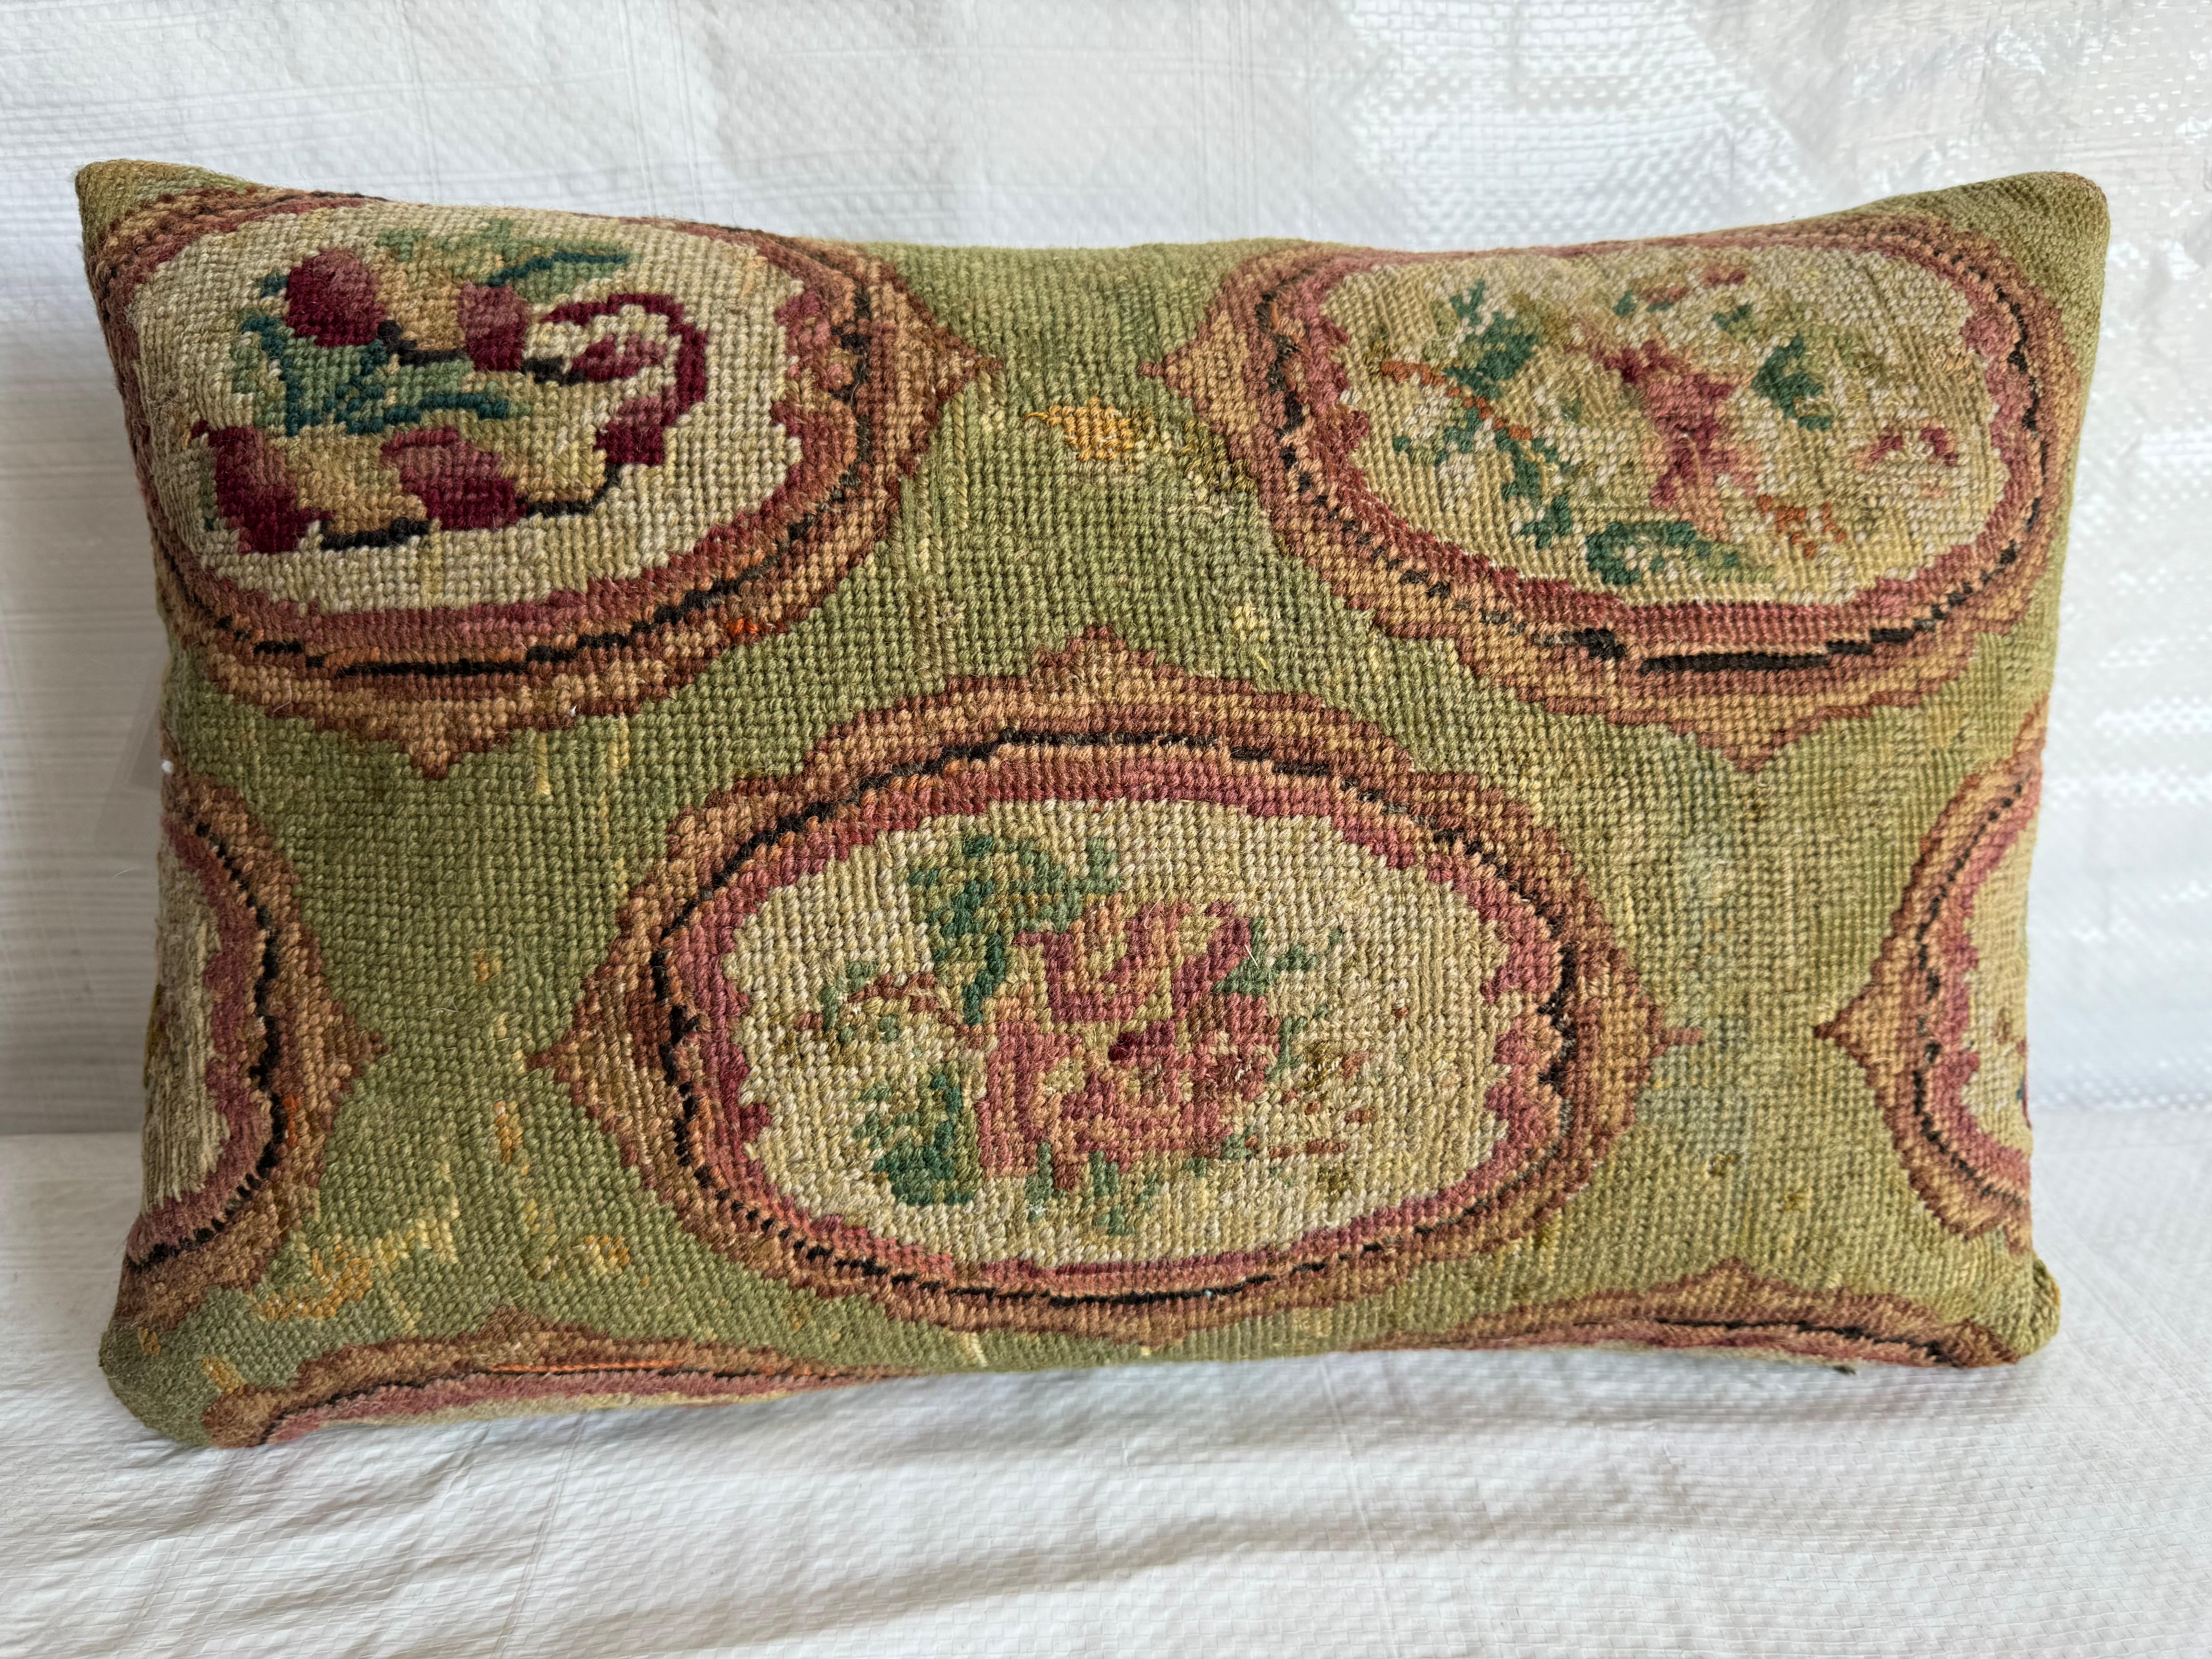 Indulge in the refined charm of yesteryear with our Elegance Preserved: 1853 English Needlework Pillow, measuring 12